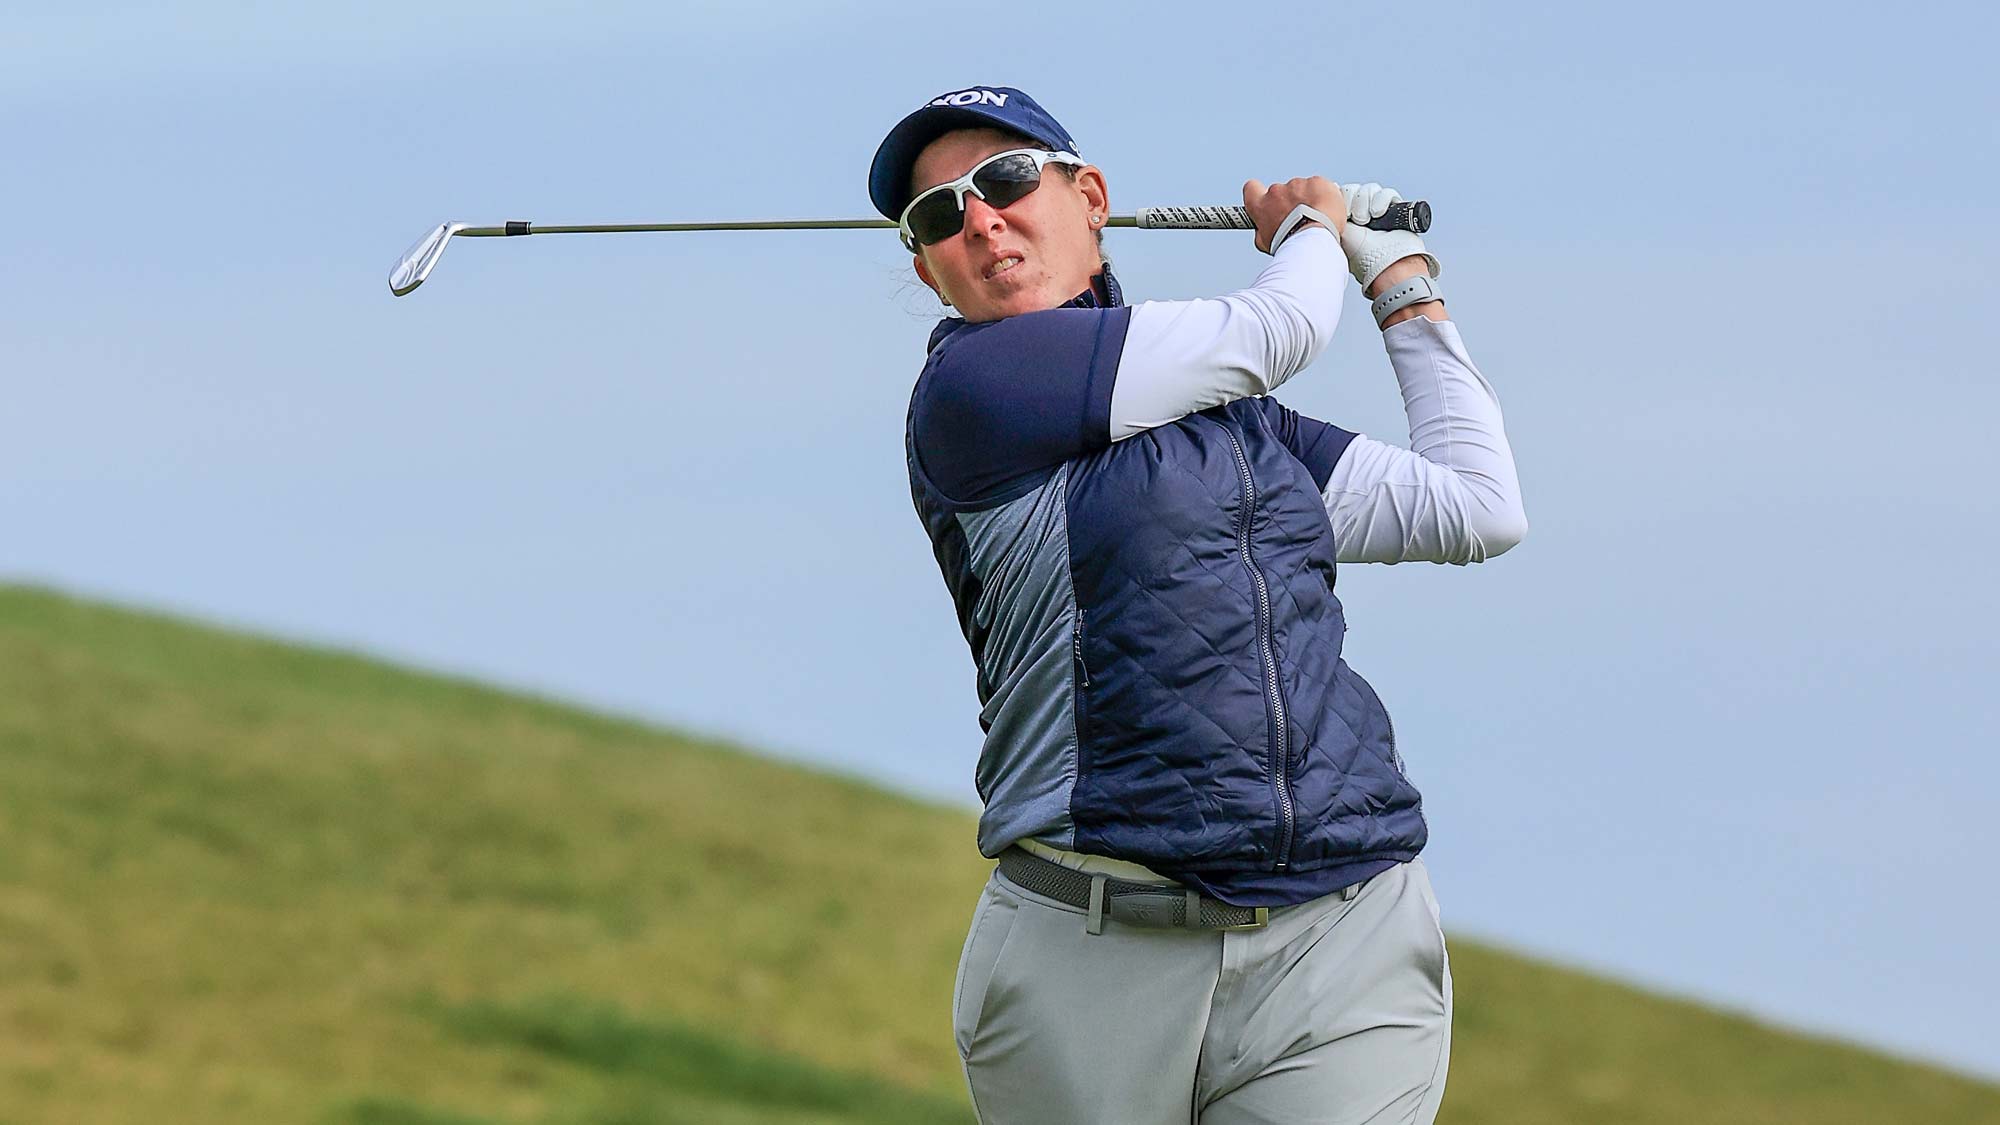 Ashleigh Buhai of South Africa plays her second shot on the 18th hole during the third round of the Trust Golf Scottish Women's Open